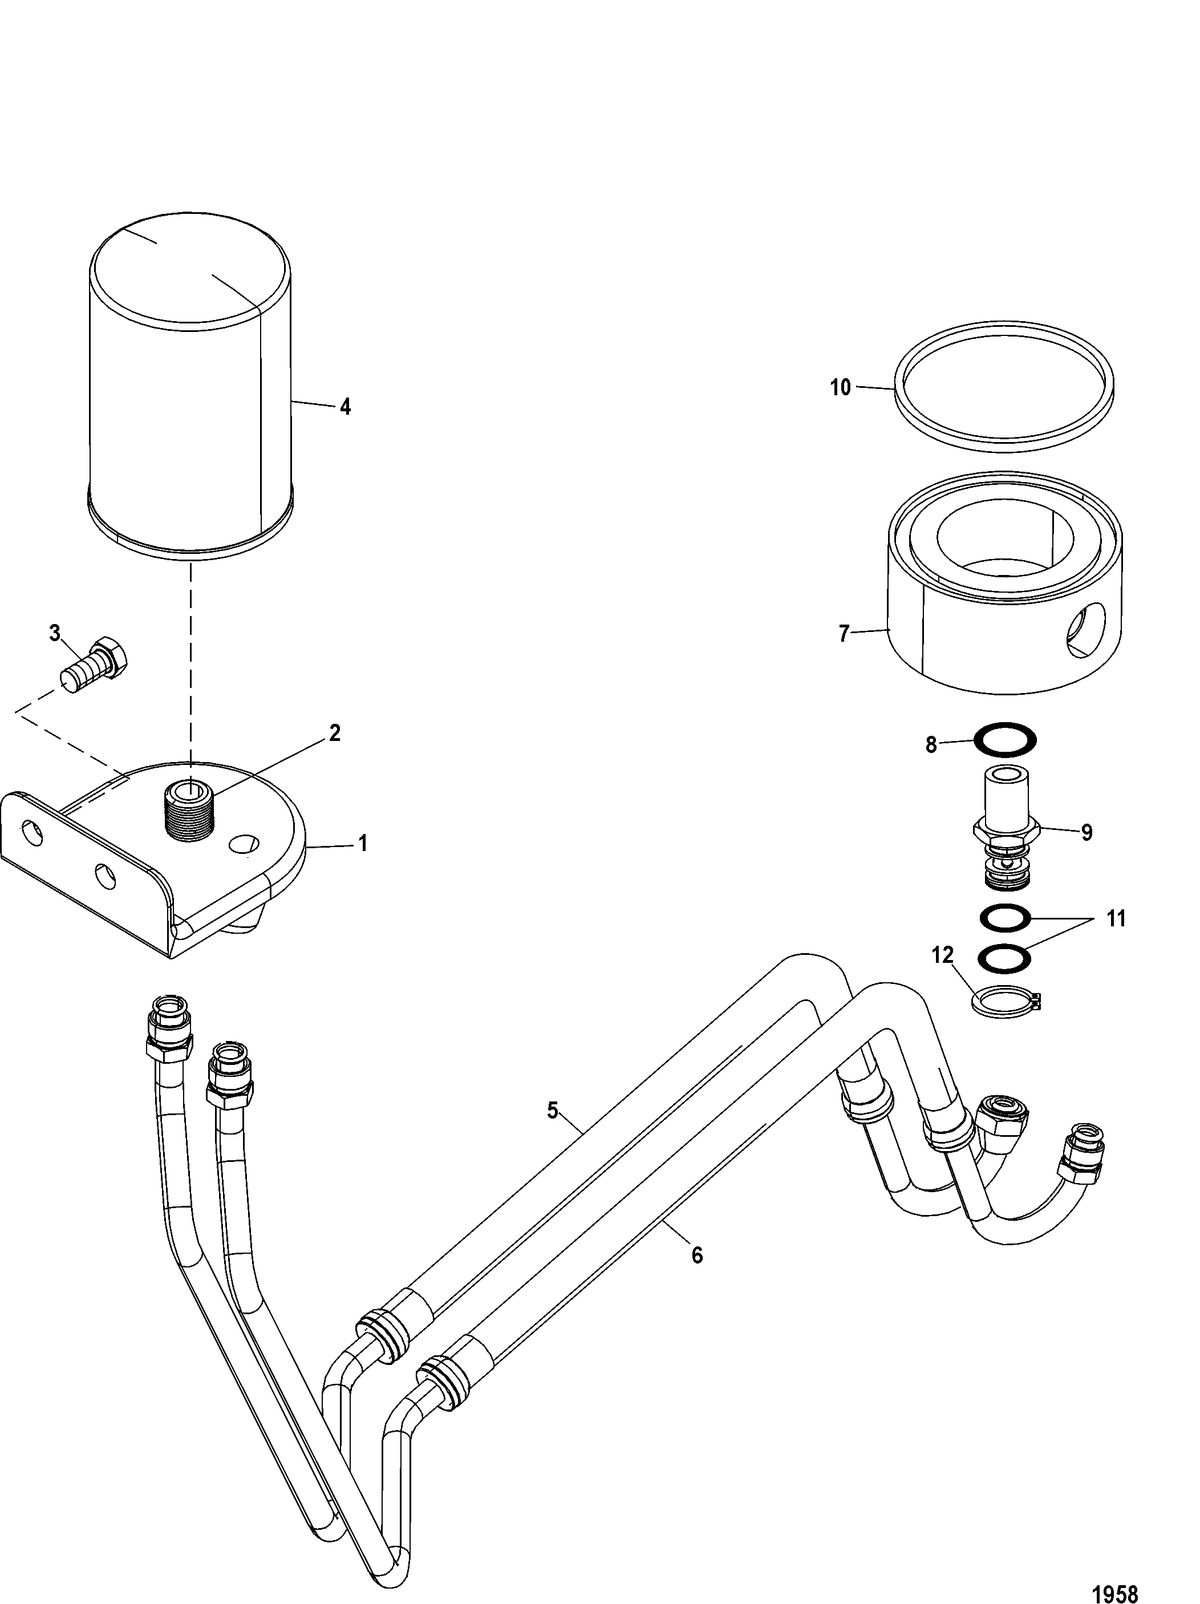 ACCESSORIES FUEL/OIL TANKS, LINES, FILTER KITS AND CORROSION Remote Oil Filter Kit(864990A 2)